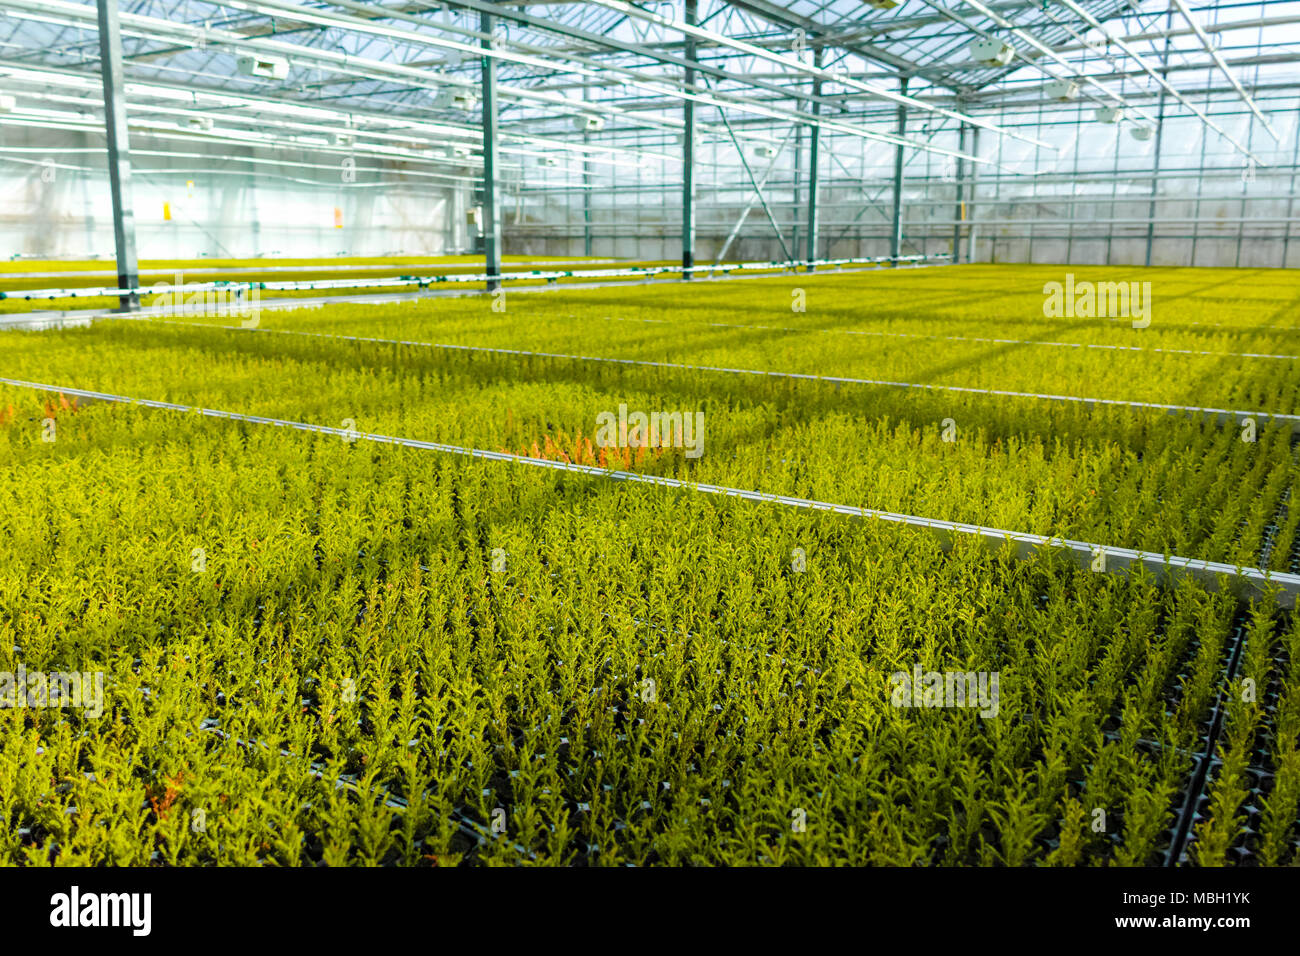 Cupressus macrocarpa Gold crest house conifer young plants growing in Dutch greenhouse in small pots Stock Photo